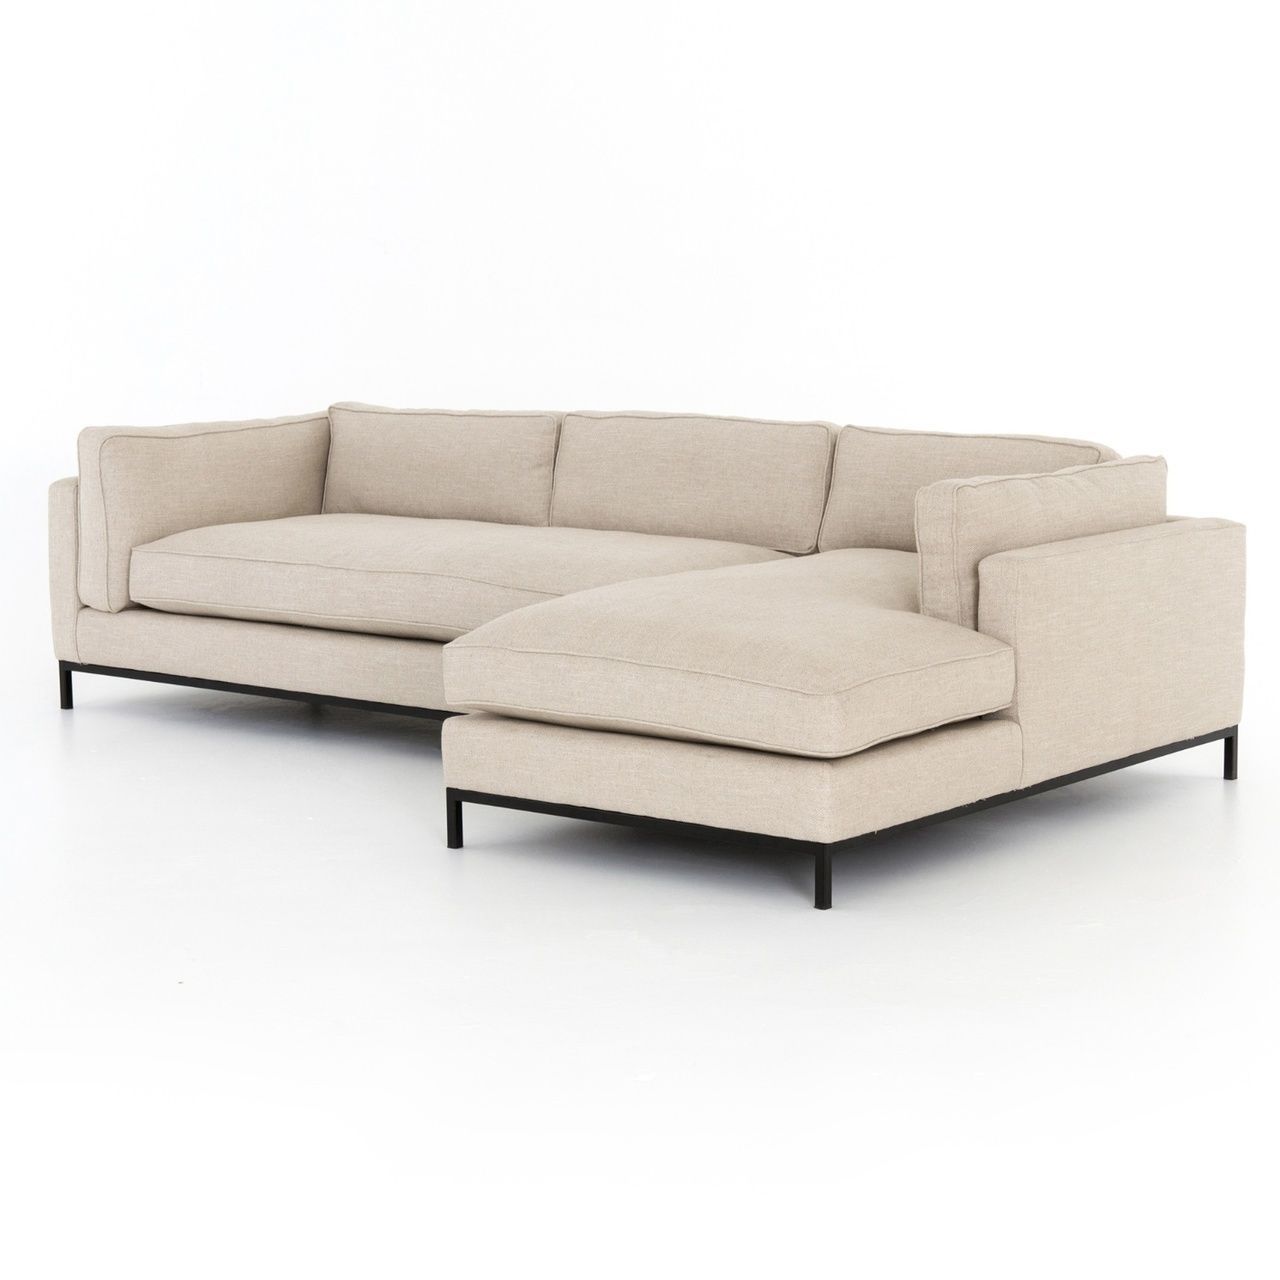 Grammercy Modern Sand Fabric 2 Piece Sectional Sofa In 2Pc Burland Contemporary Sectional Sofas Charcoal (View 13 of 15)